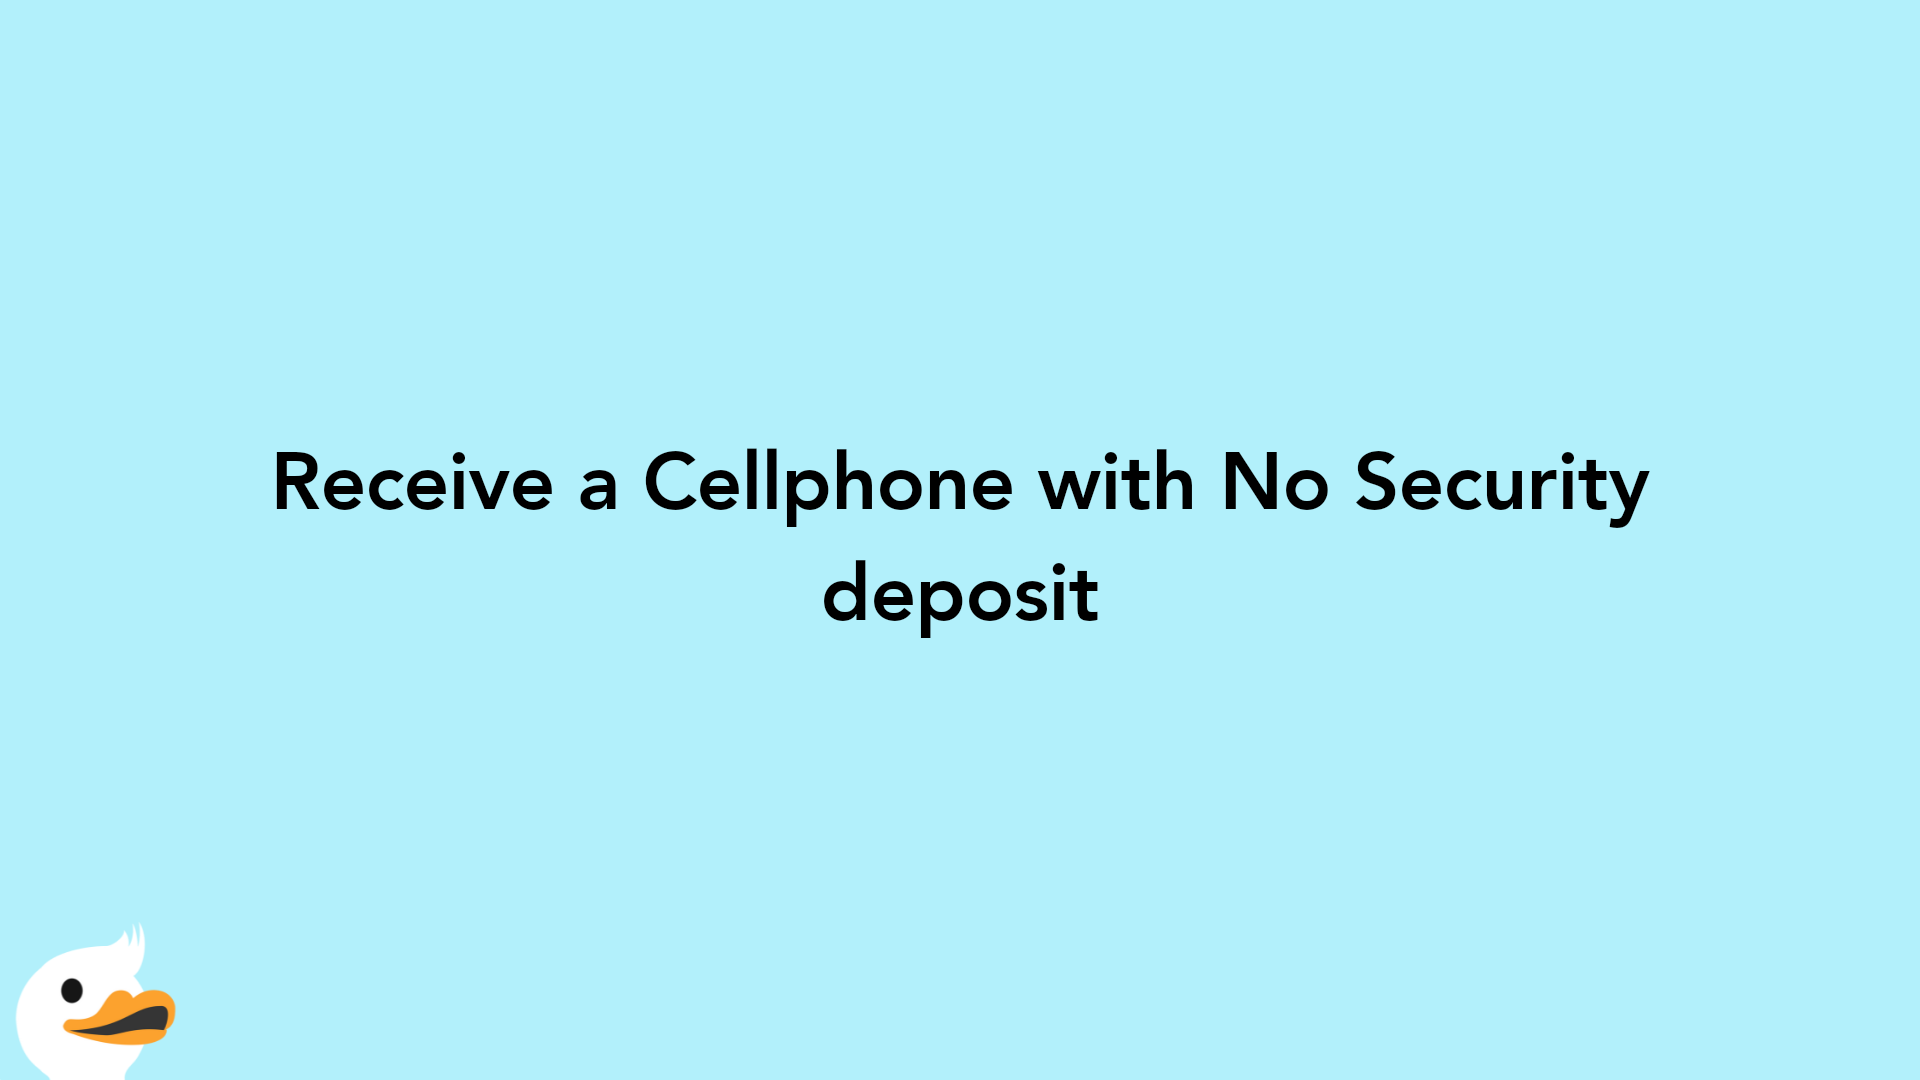 Receive a Cellphone with No Security deposit